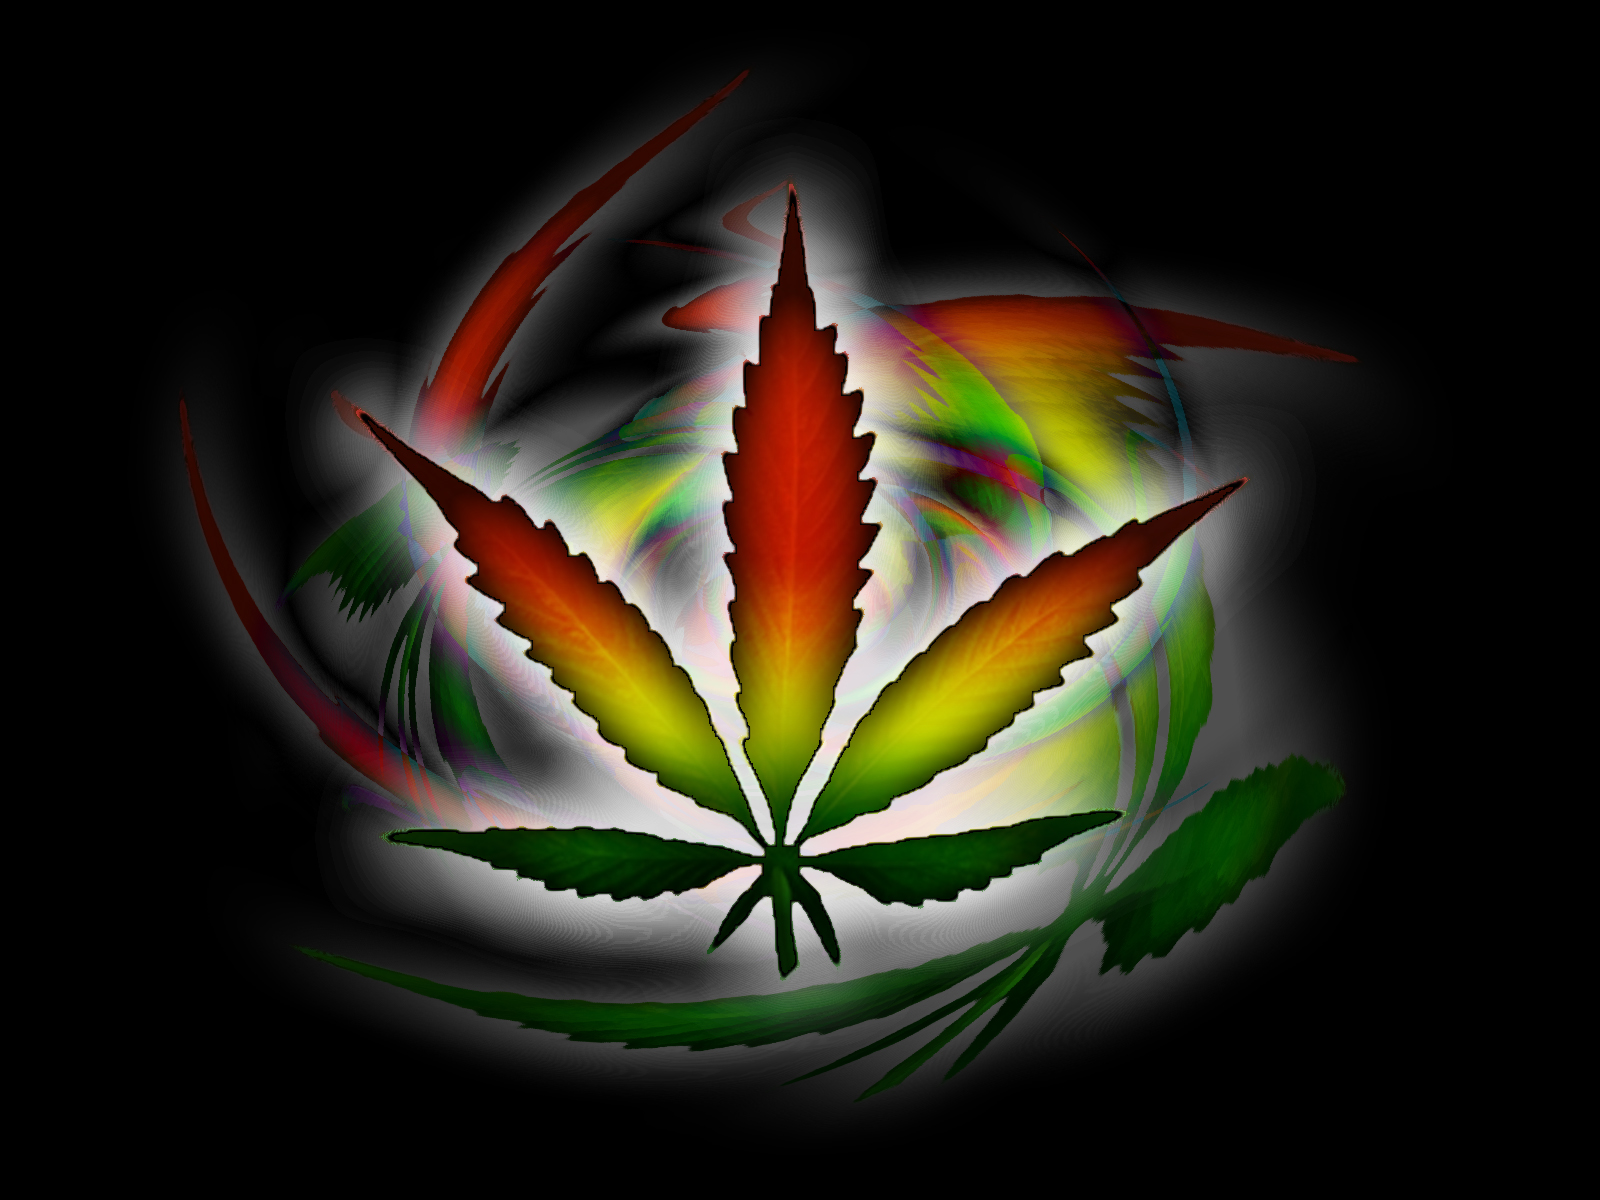 1600x1200 Weed Backgrounds For Facebook For weed backgrounds hd.